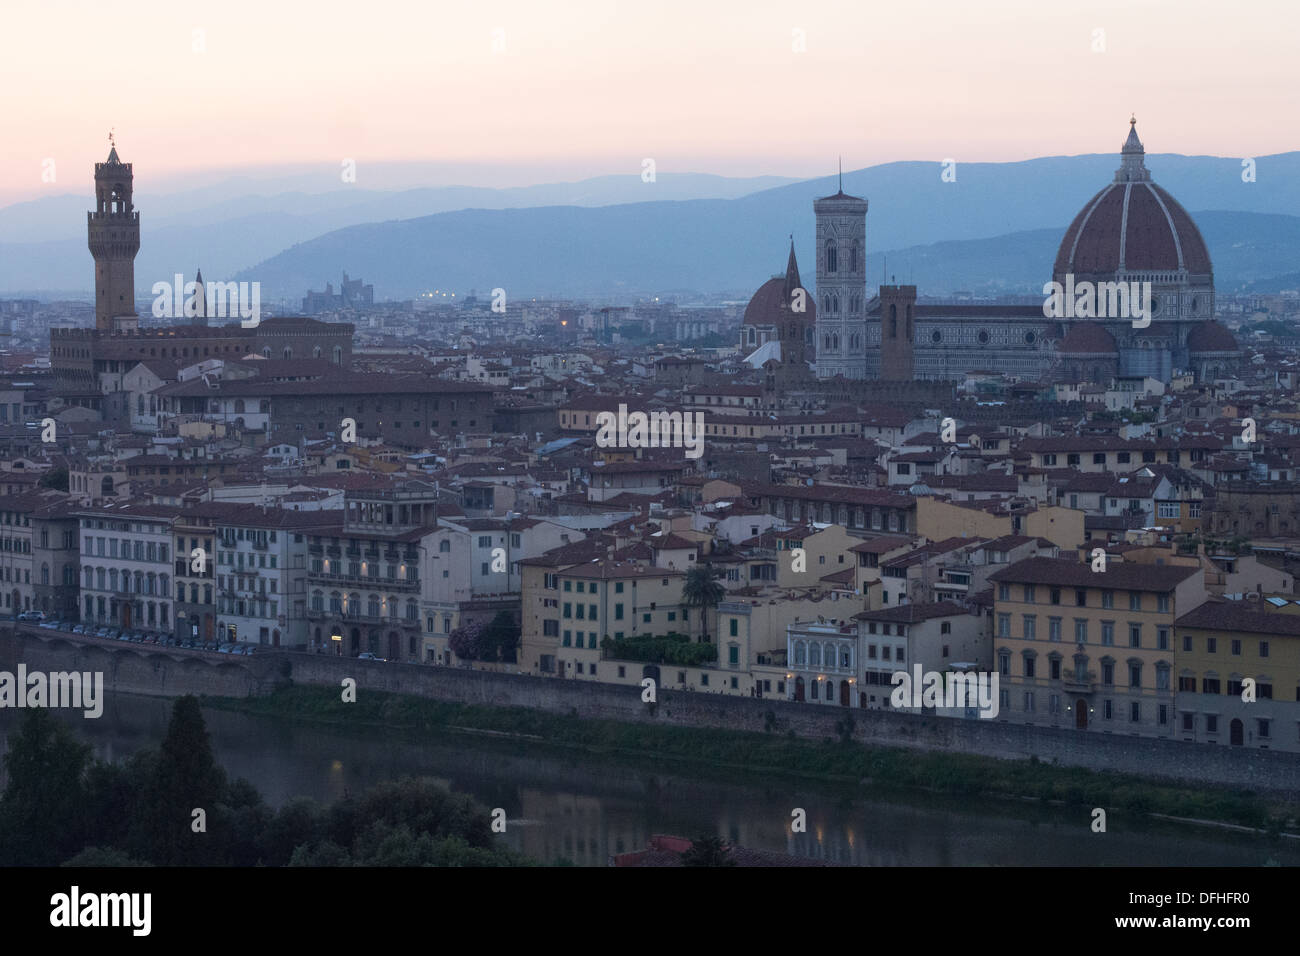 View from Piazzale Michelangelo towards the Duomo (Cathedral) with the Palazzo Vecchio on the left, Florence, Tuscany, Italy Stock Photo